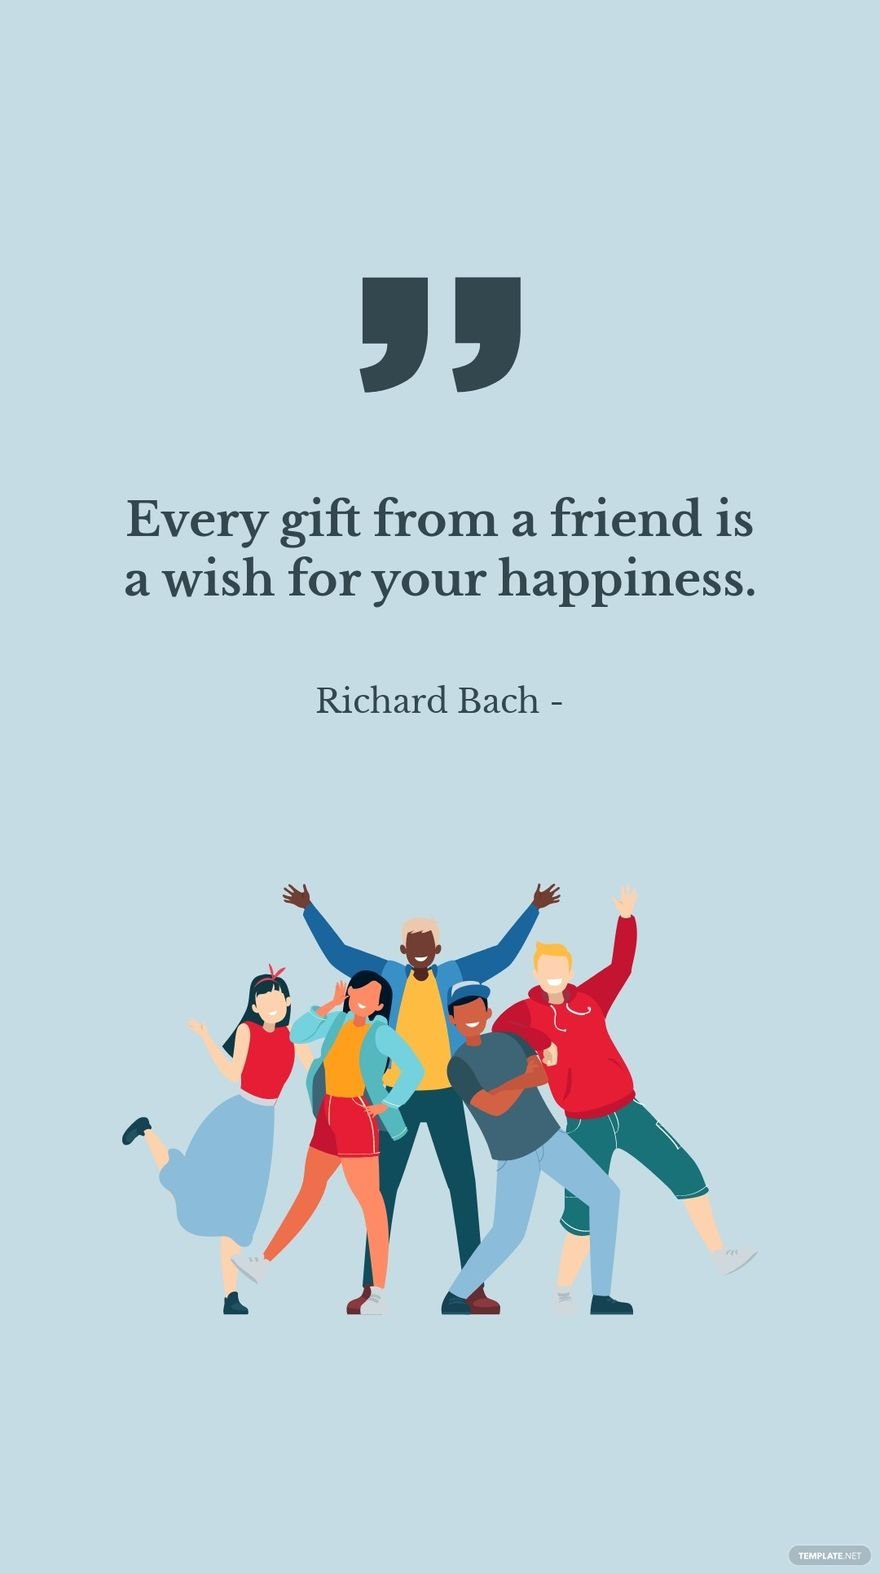 Richard Bach - Every gift from a friend is a wish for your happiness.